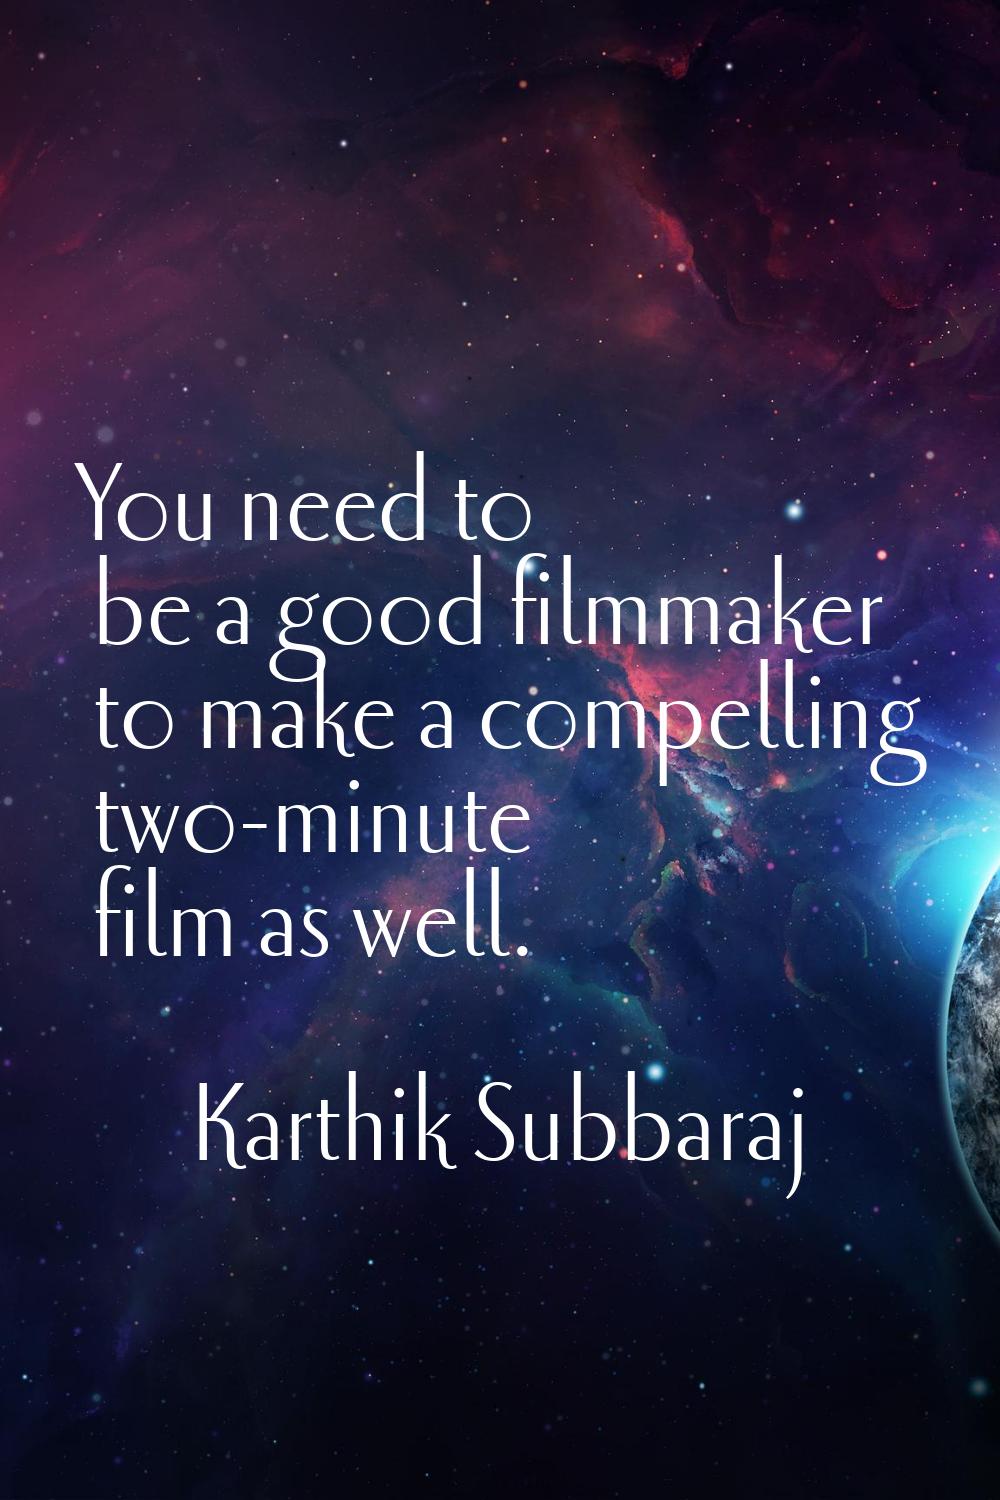 You need to be a good filmmaker to make a compelling two-minute film as well.